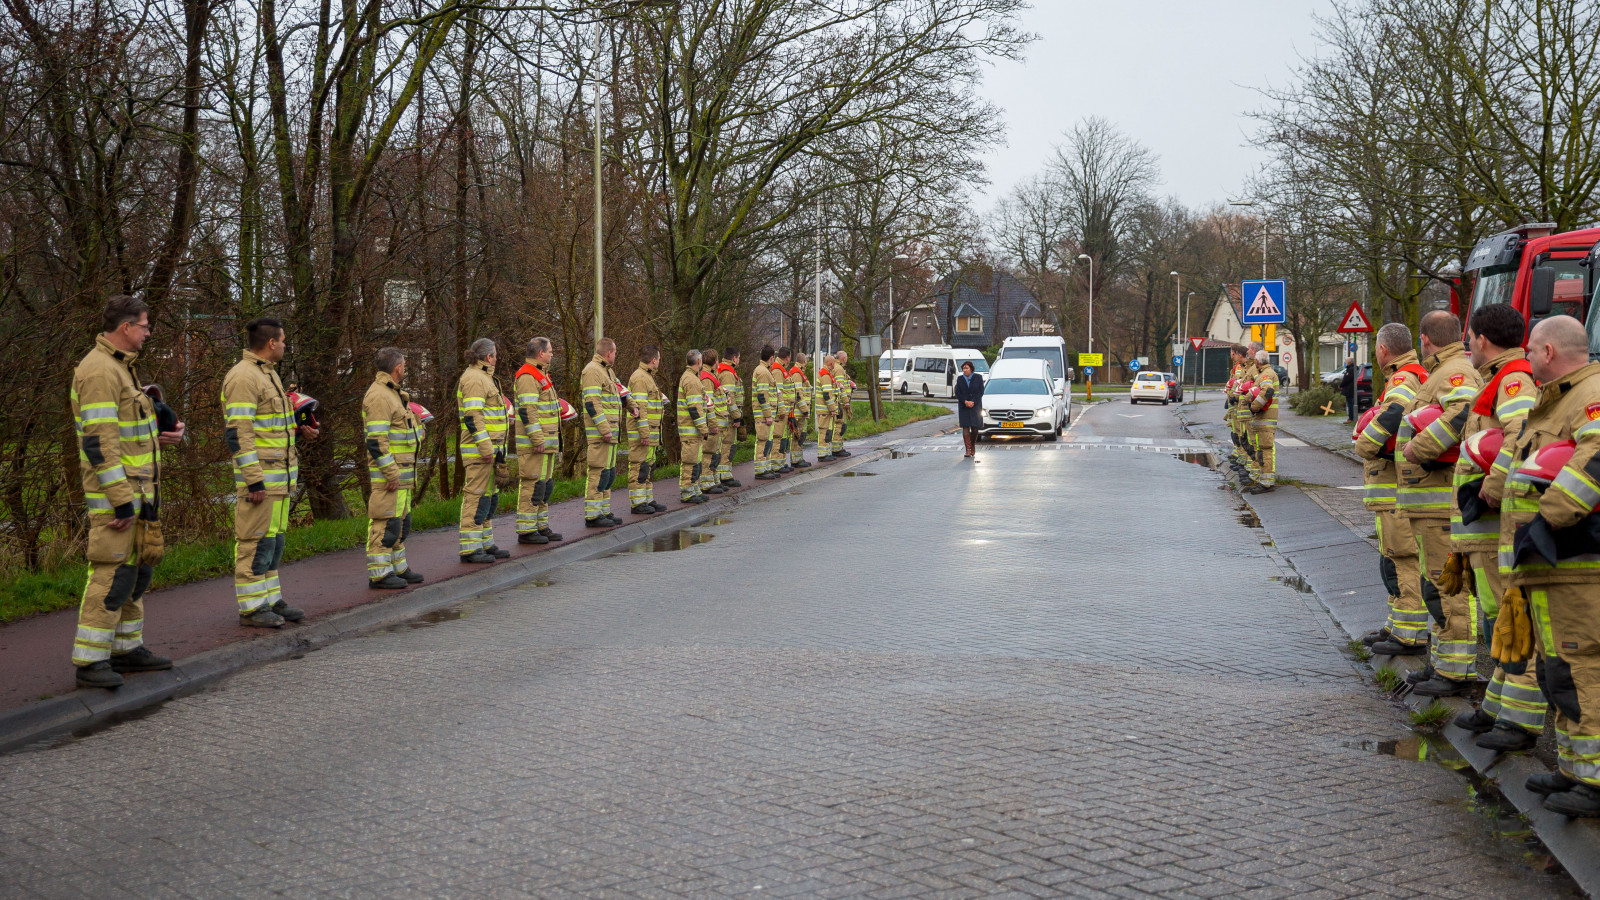 The fire brigade forms an honor guard for Maxime